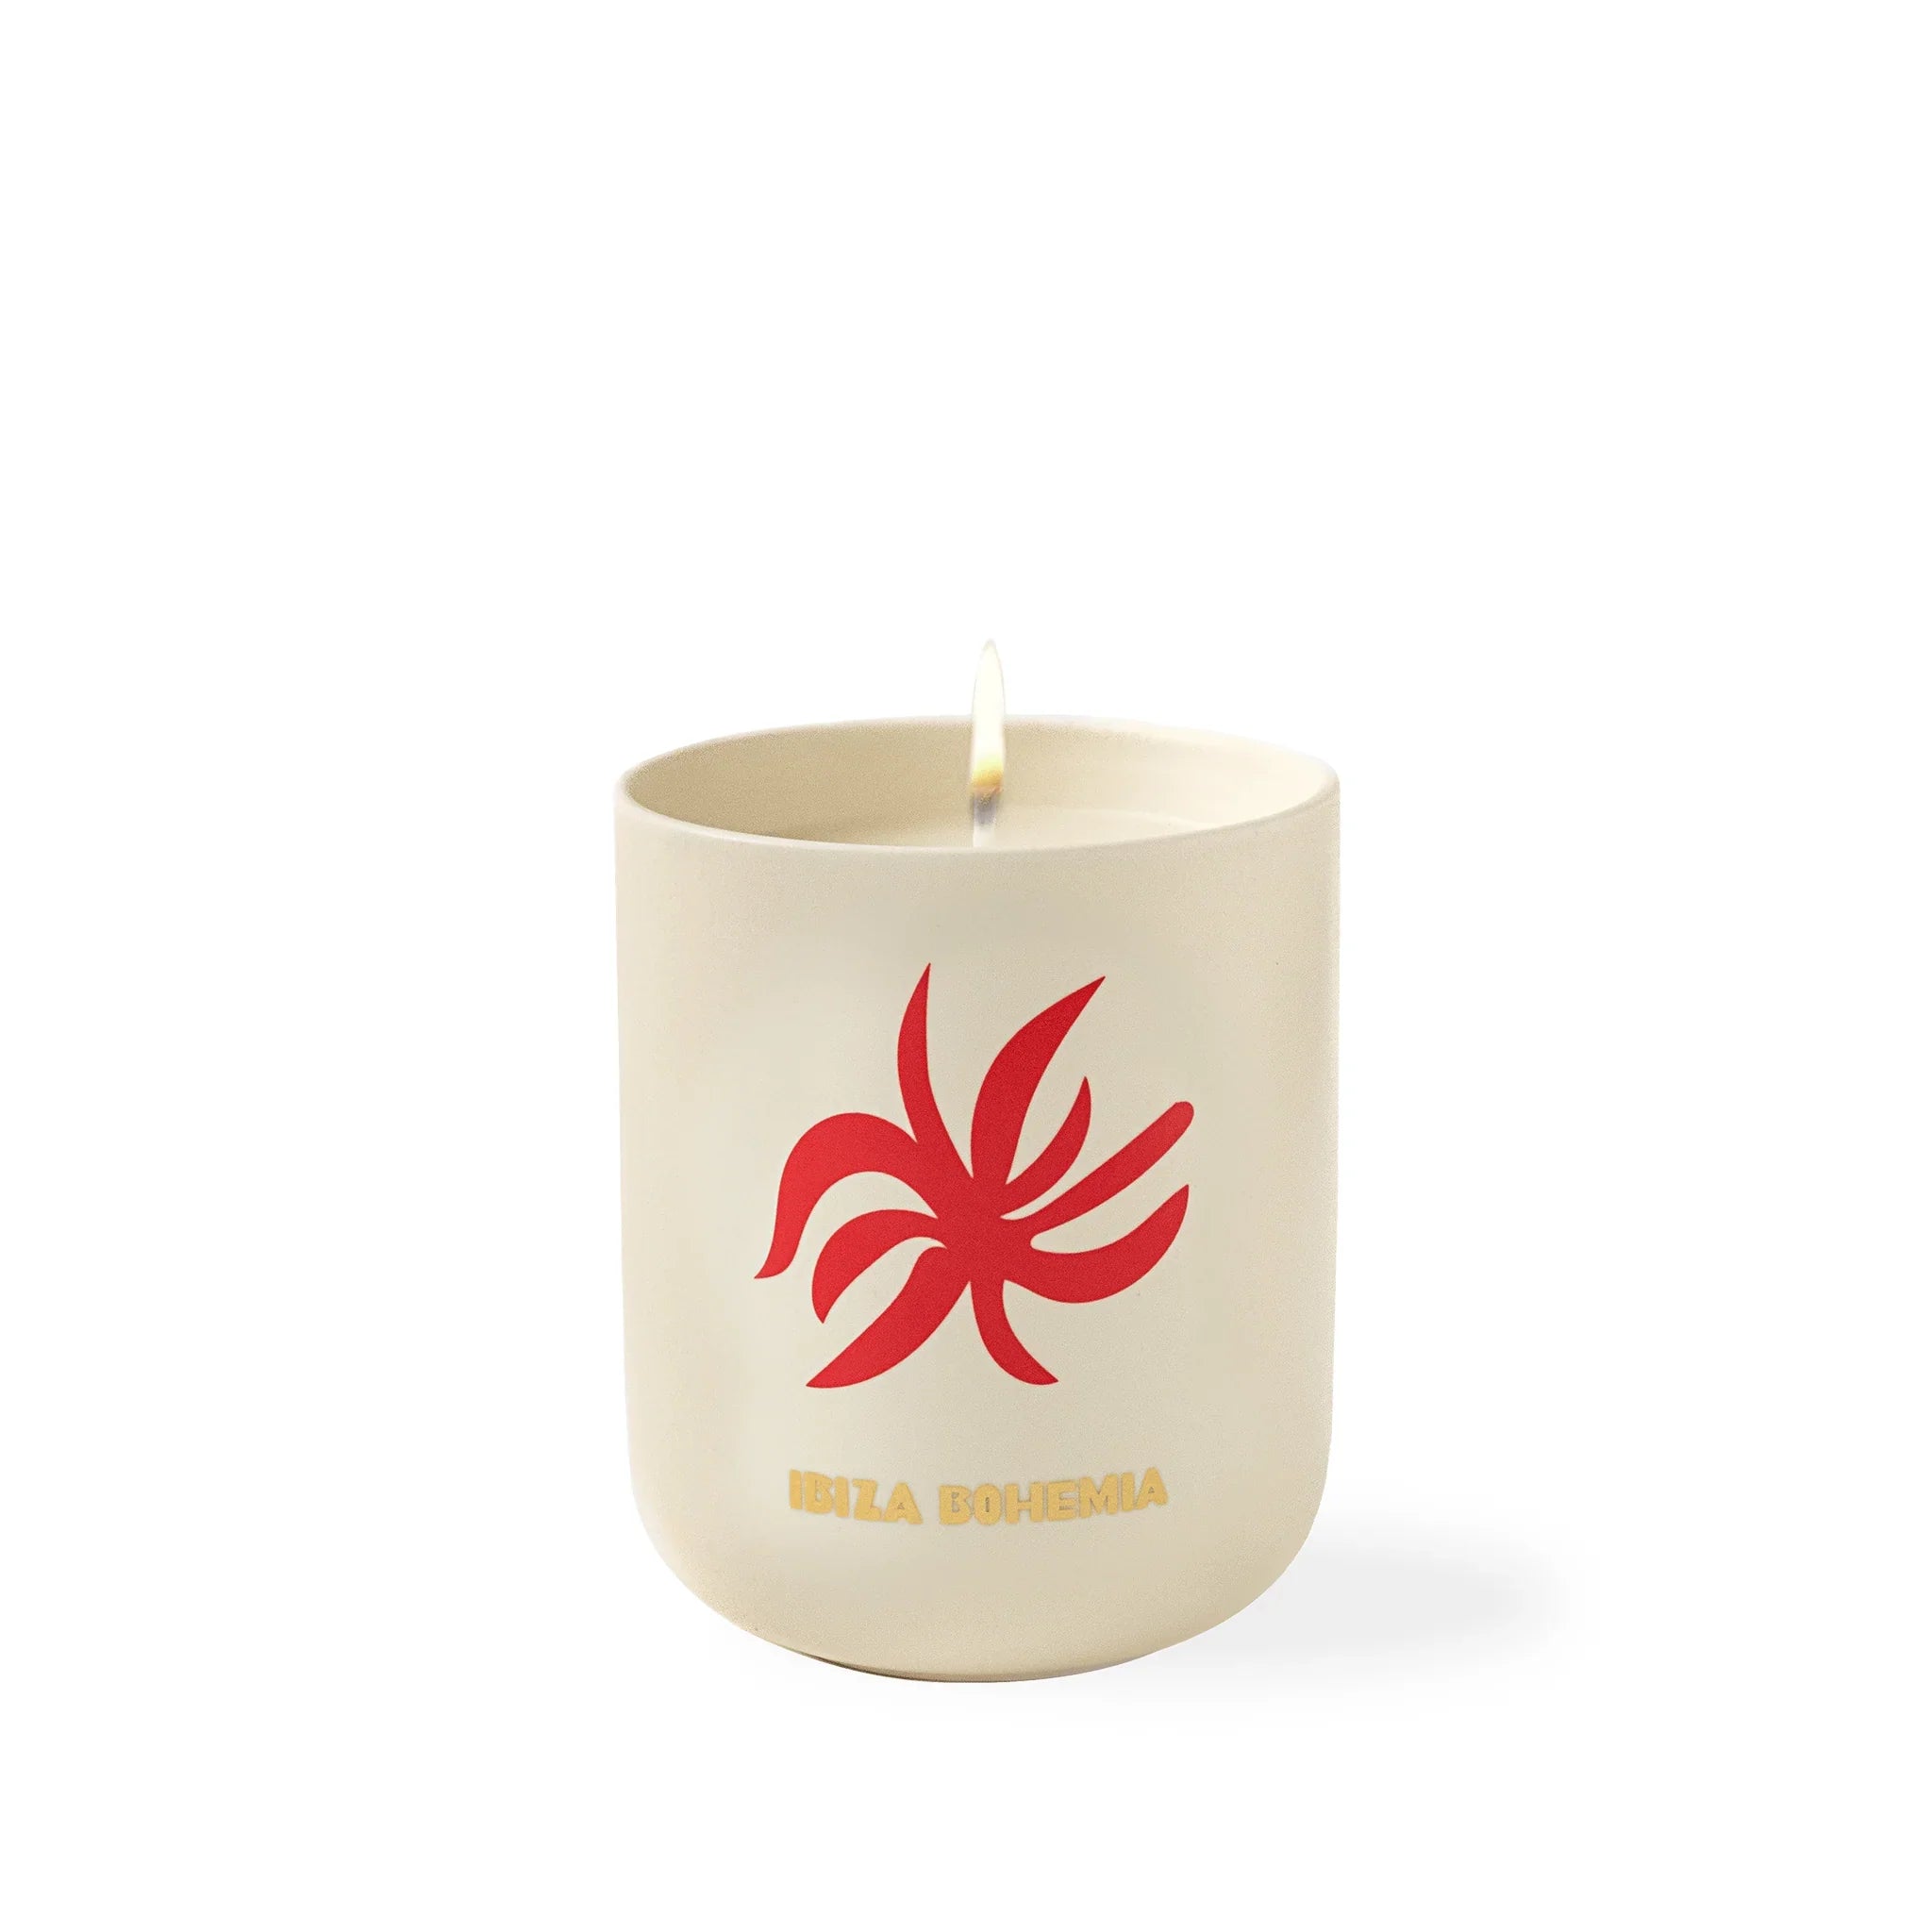 Assouline Ibiza Bohemia – Travel From Home Candle